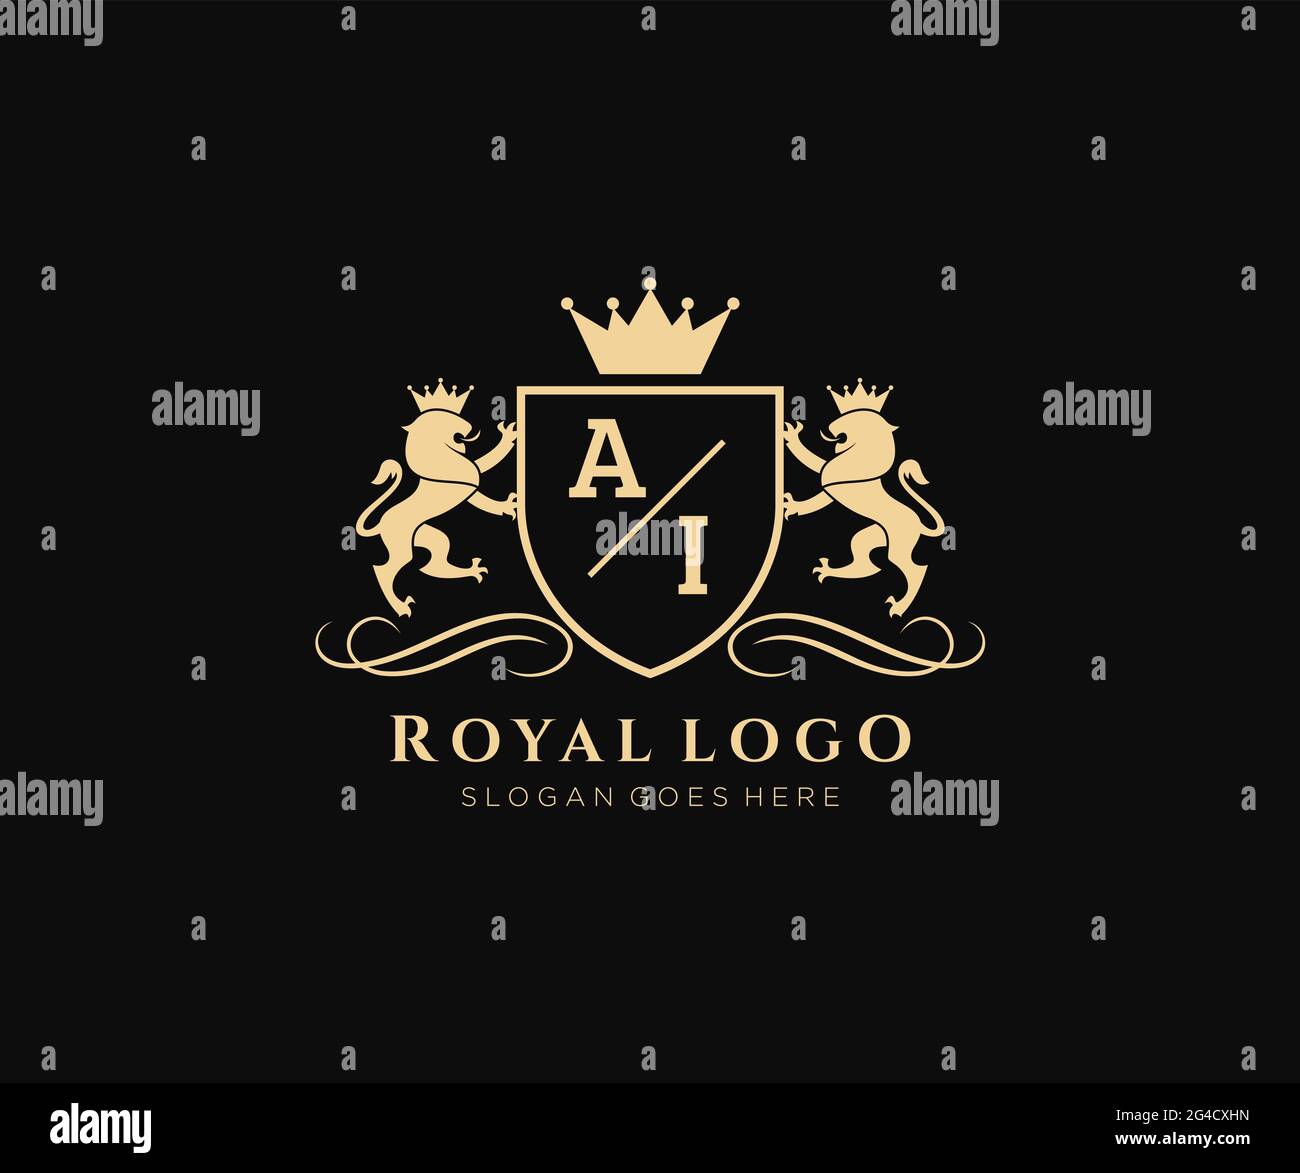 AI Letter Lion Royal Luxury Heraldic,Crest Logo template in vector art for Restaurant, Royalty, Boutique, Cafe, Hotel, Heraldic, Jewelry, Fashion and Stock Vector